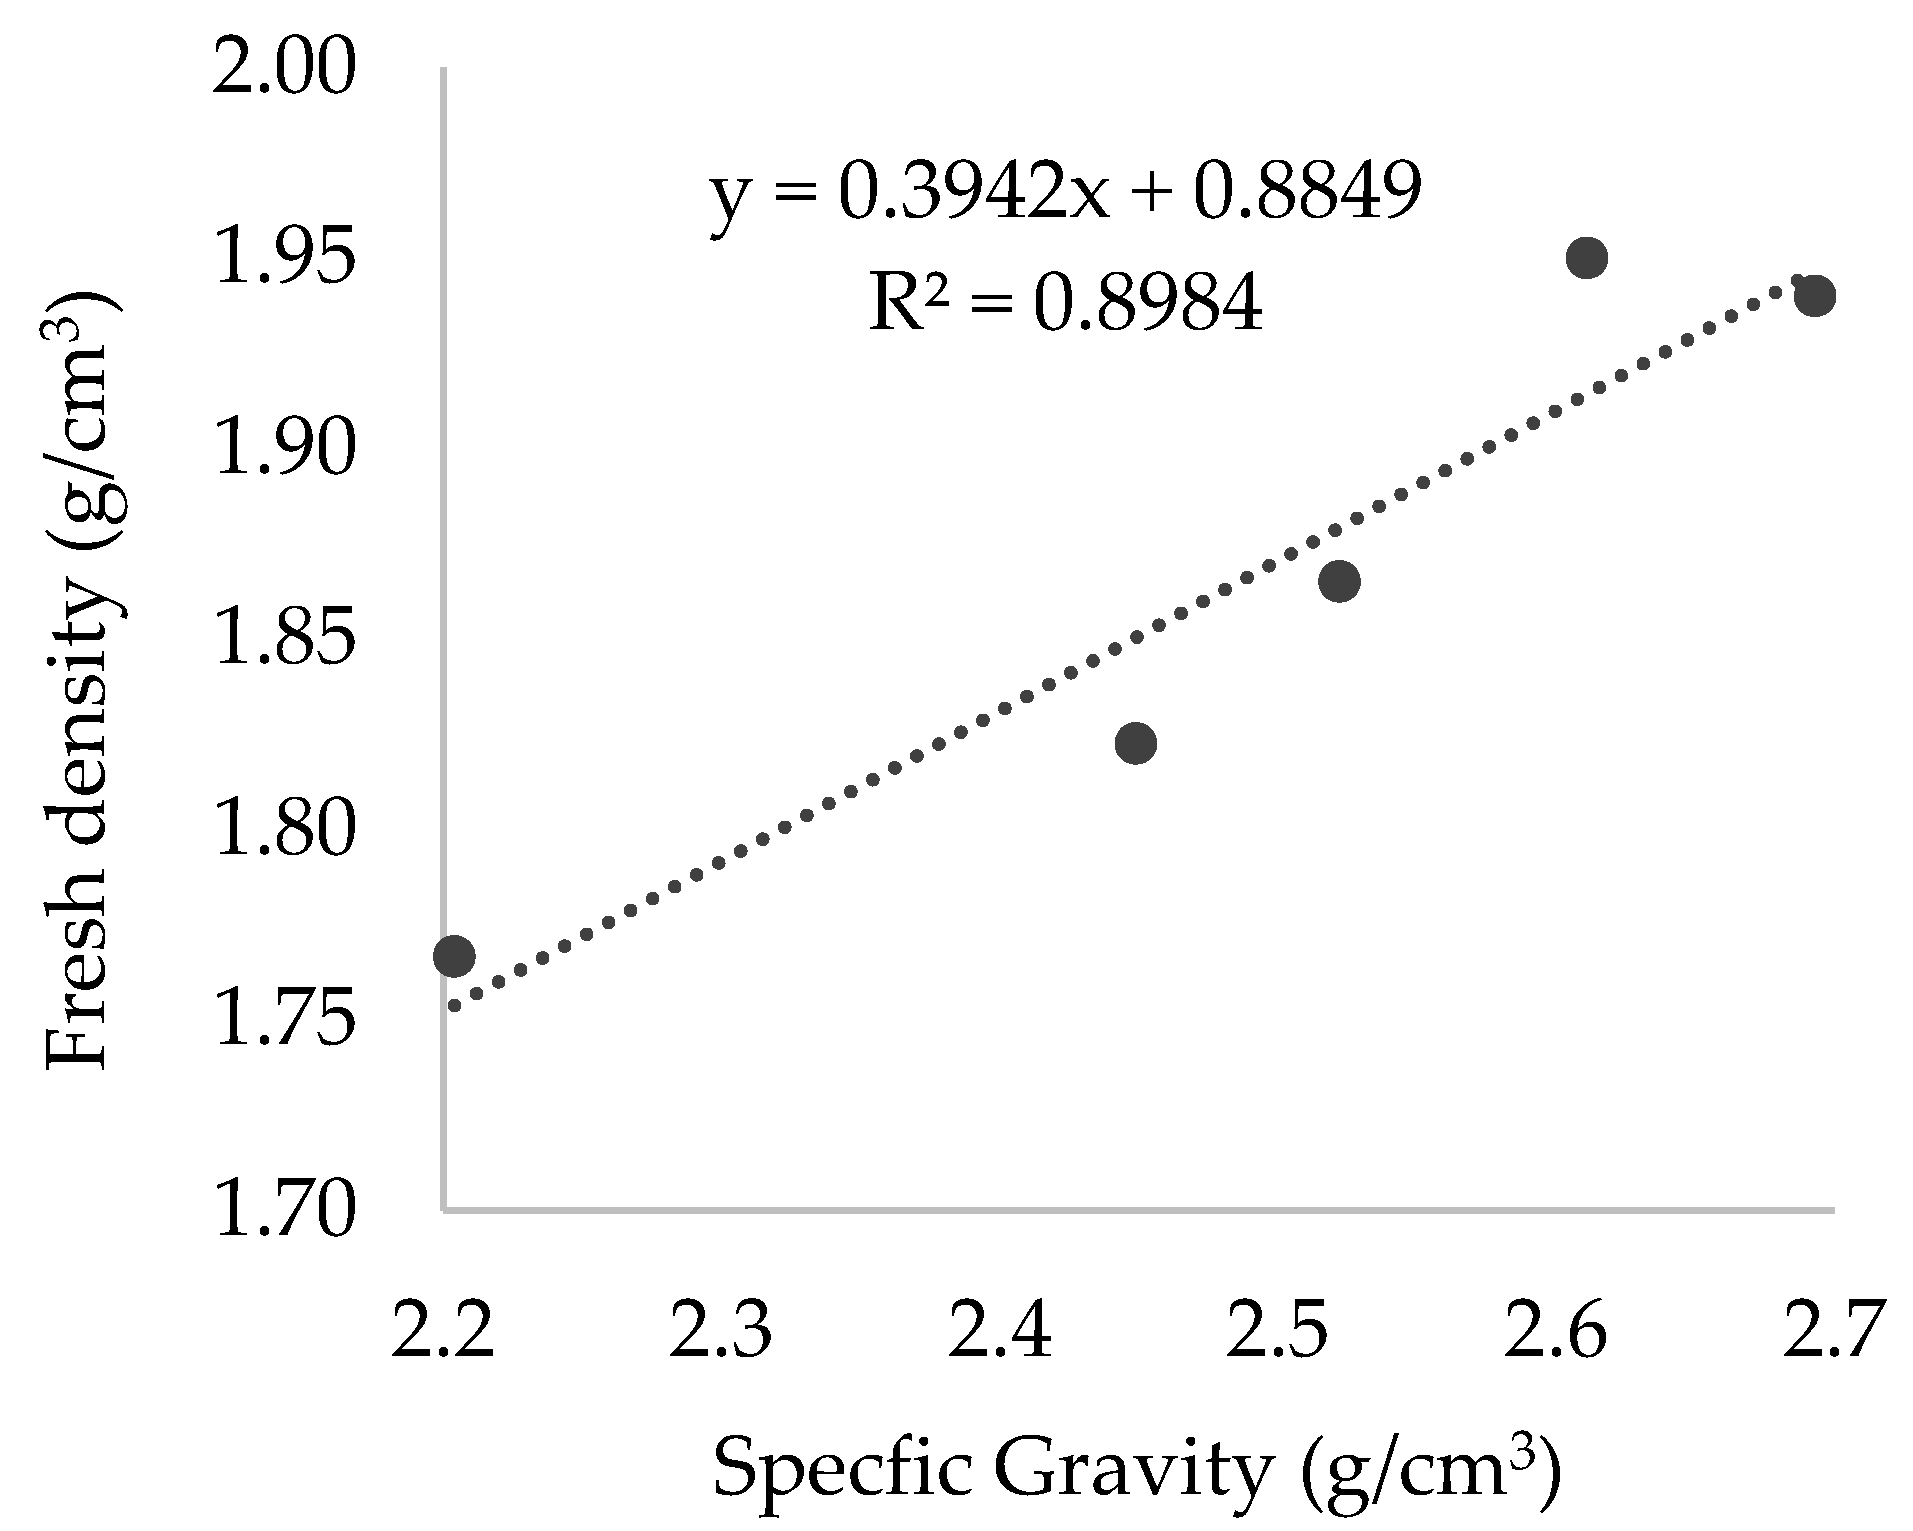 Correlation between fresh density in mortars and specific gravity of the fillers used in mortars.